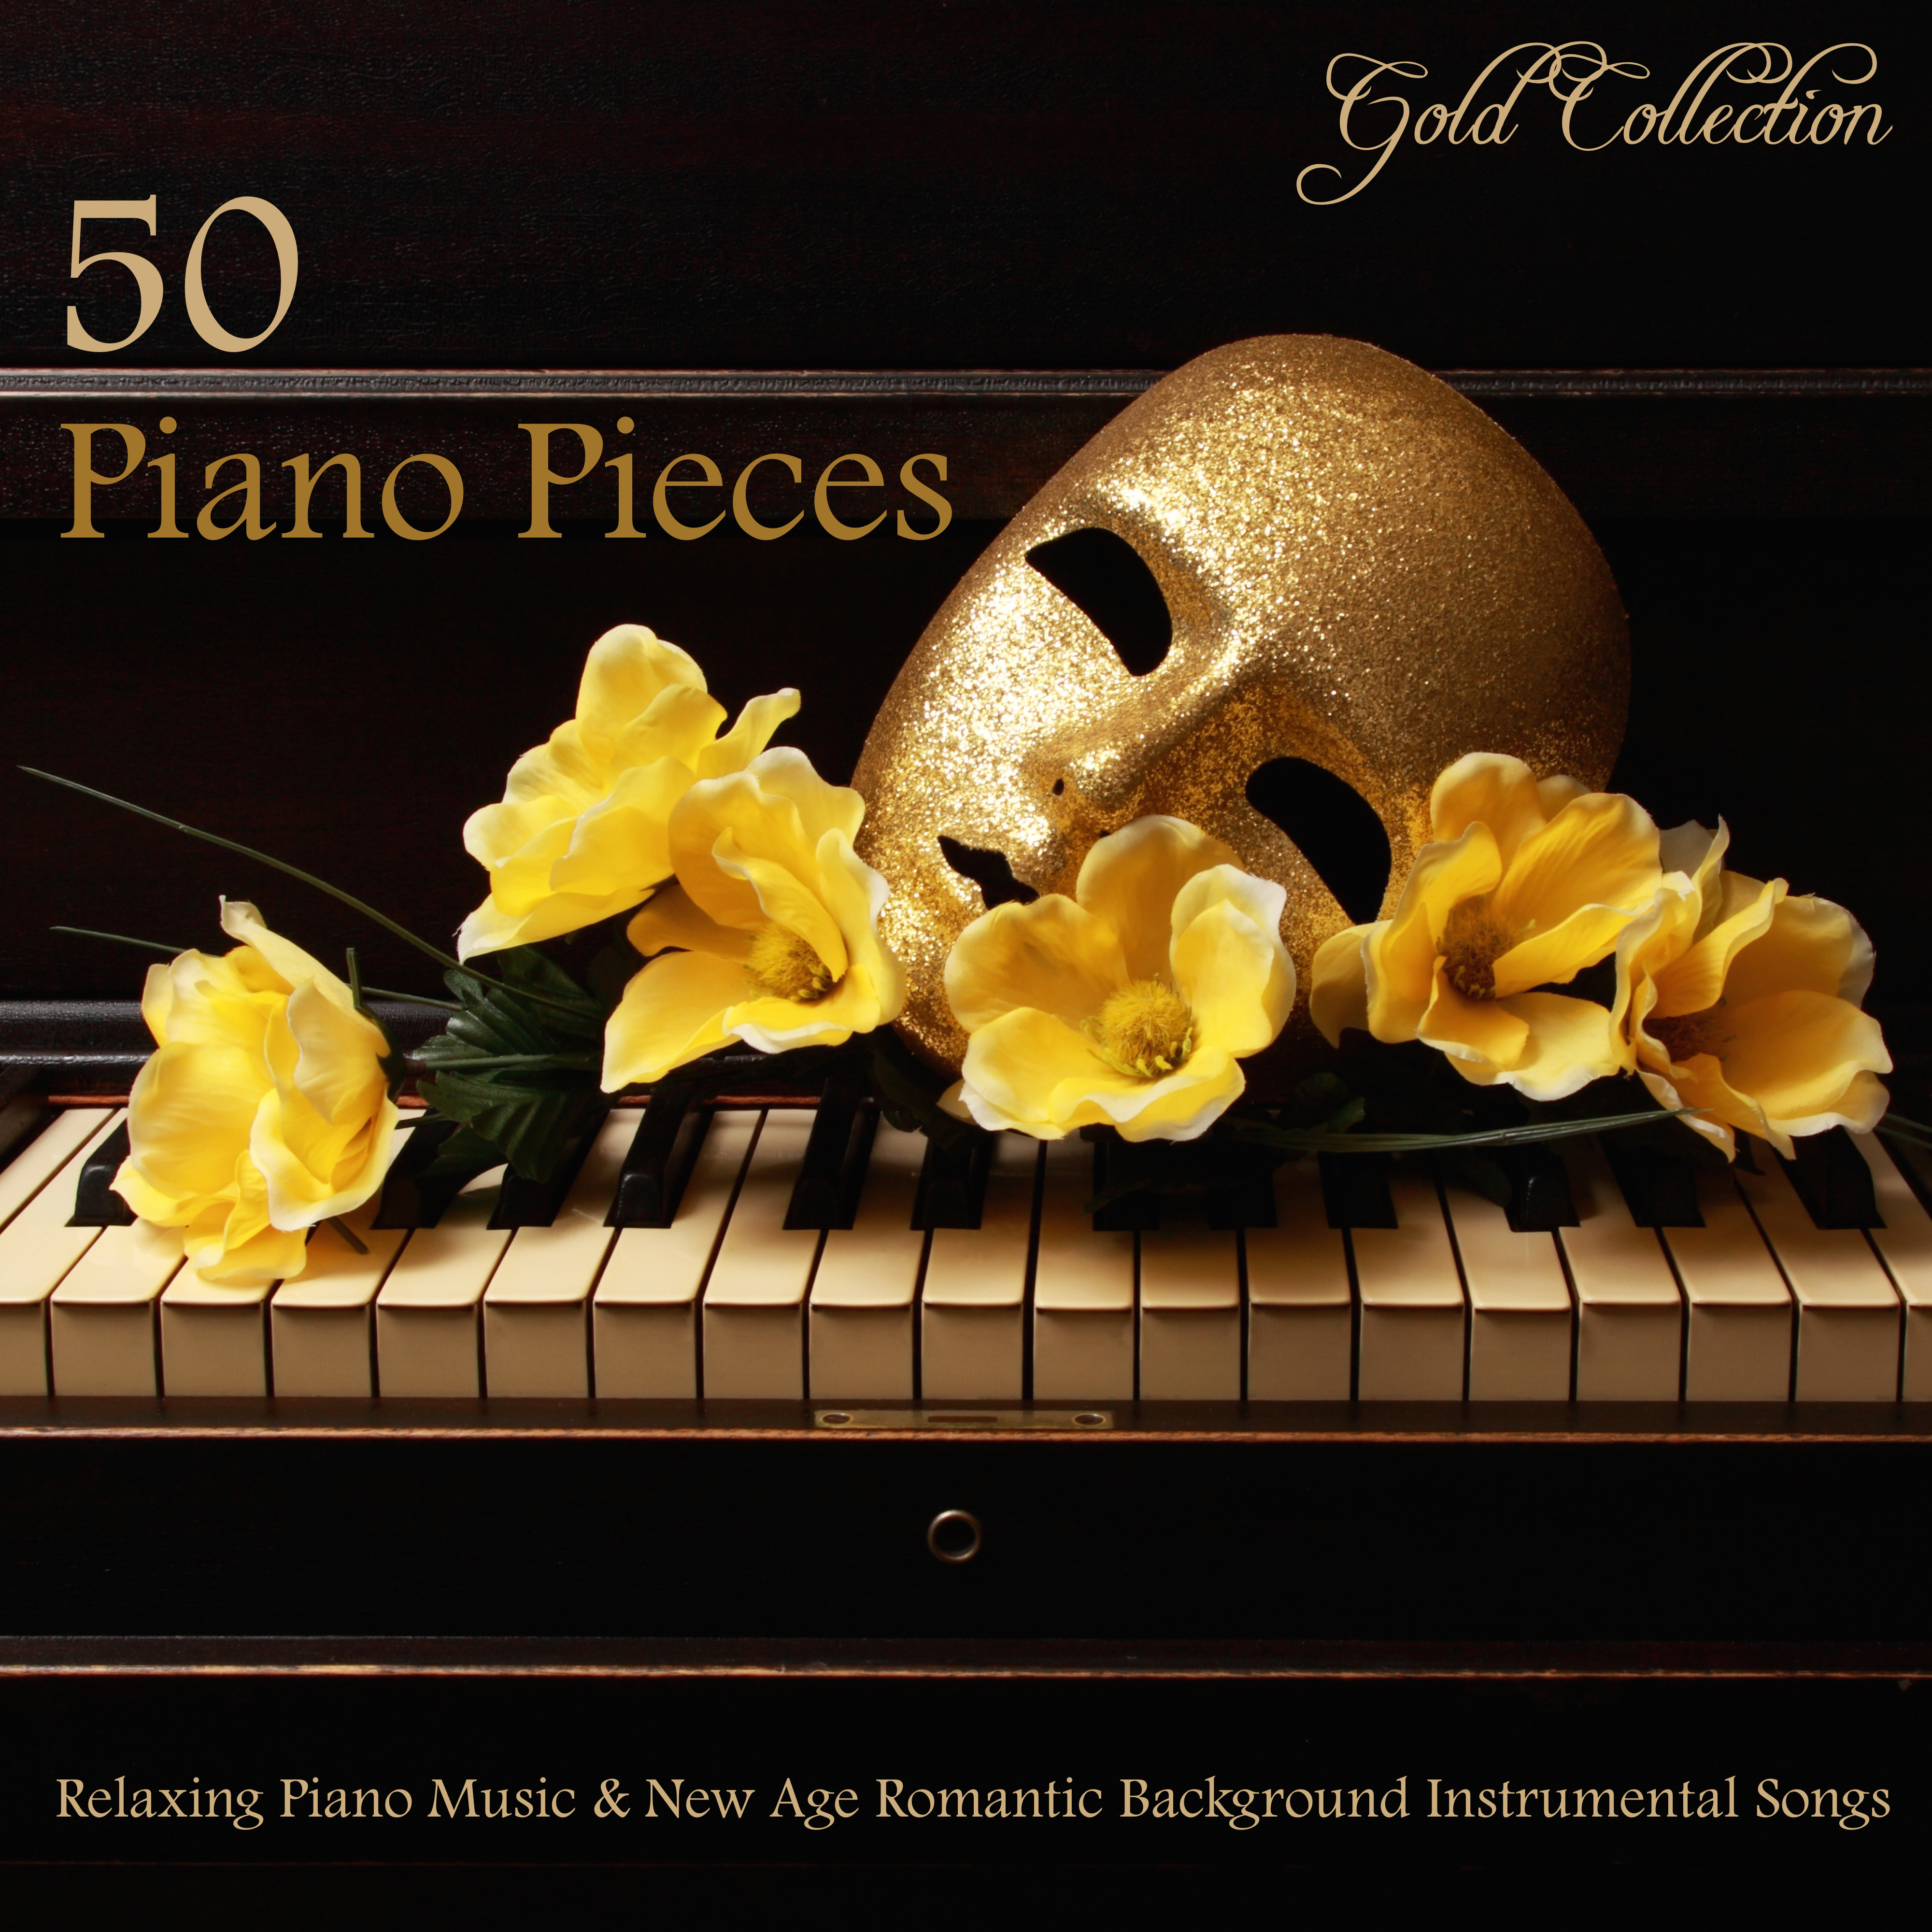 Easy Listening Relaxing Piano